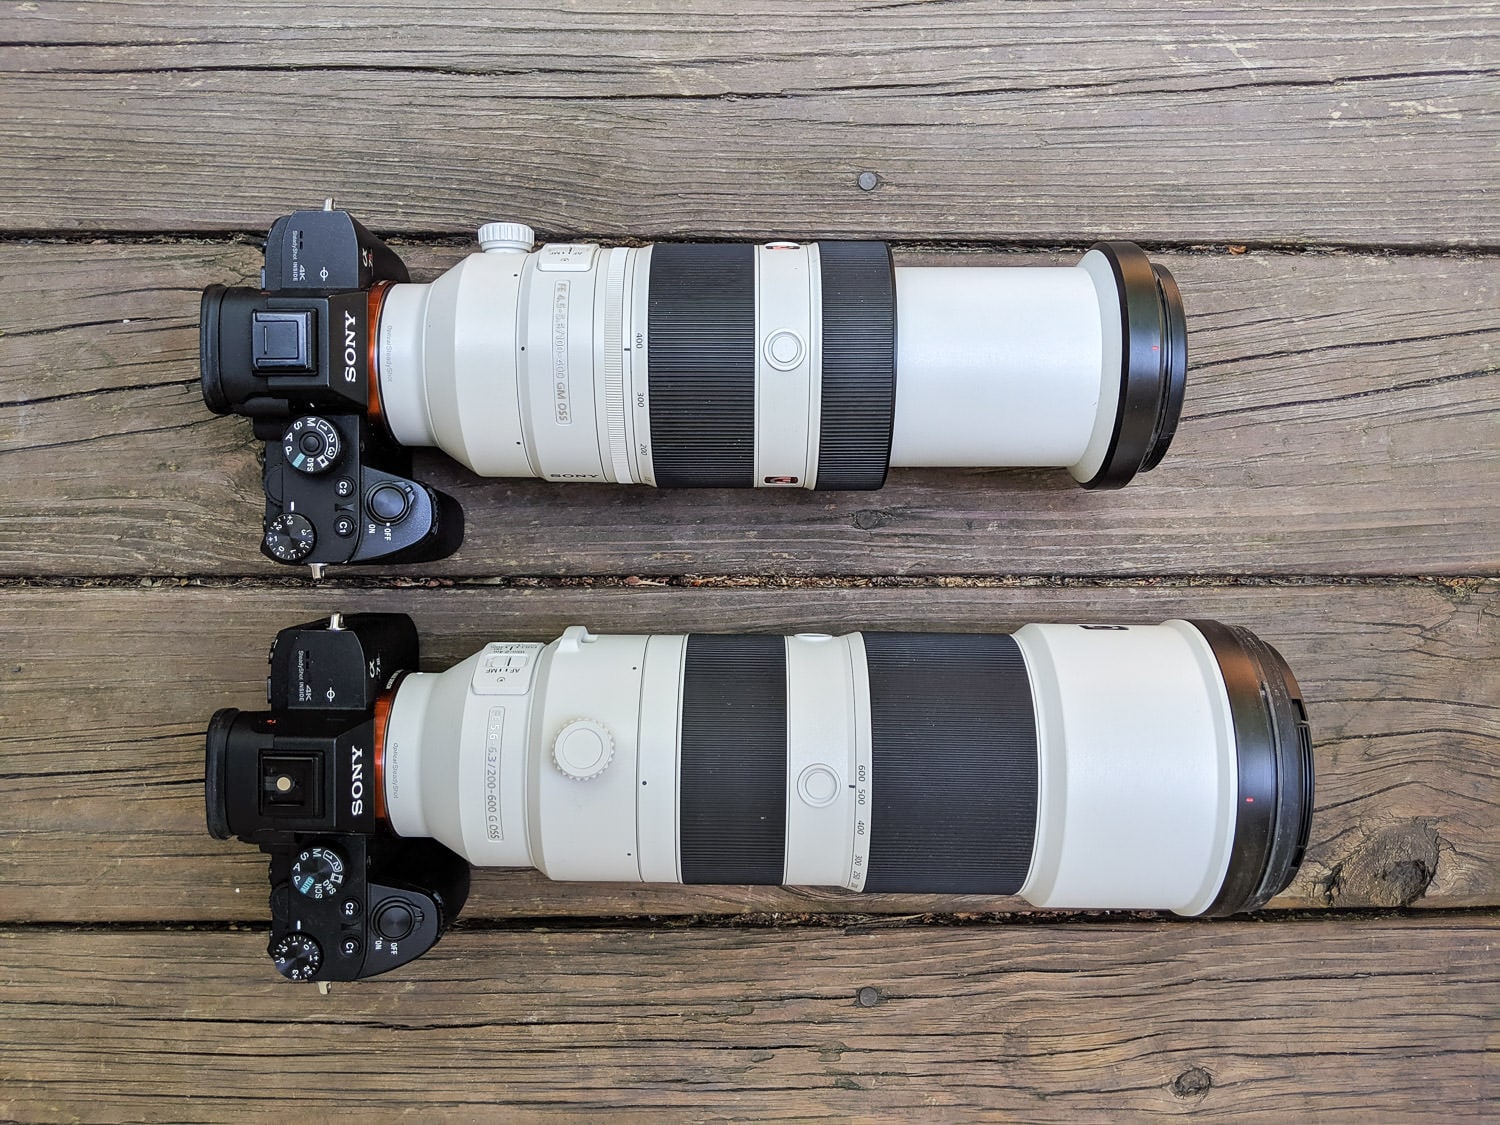 Sony 200-600mm f5.6-6.3 Review  The MUST HAVE Sony LENS for Wildlife &  Sports Photography 